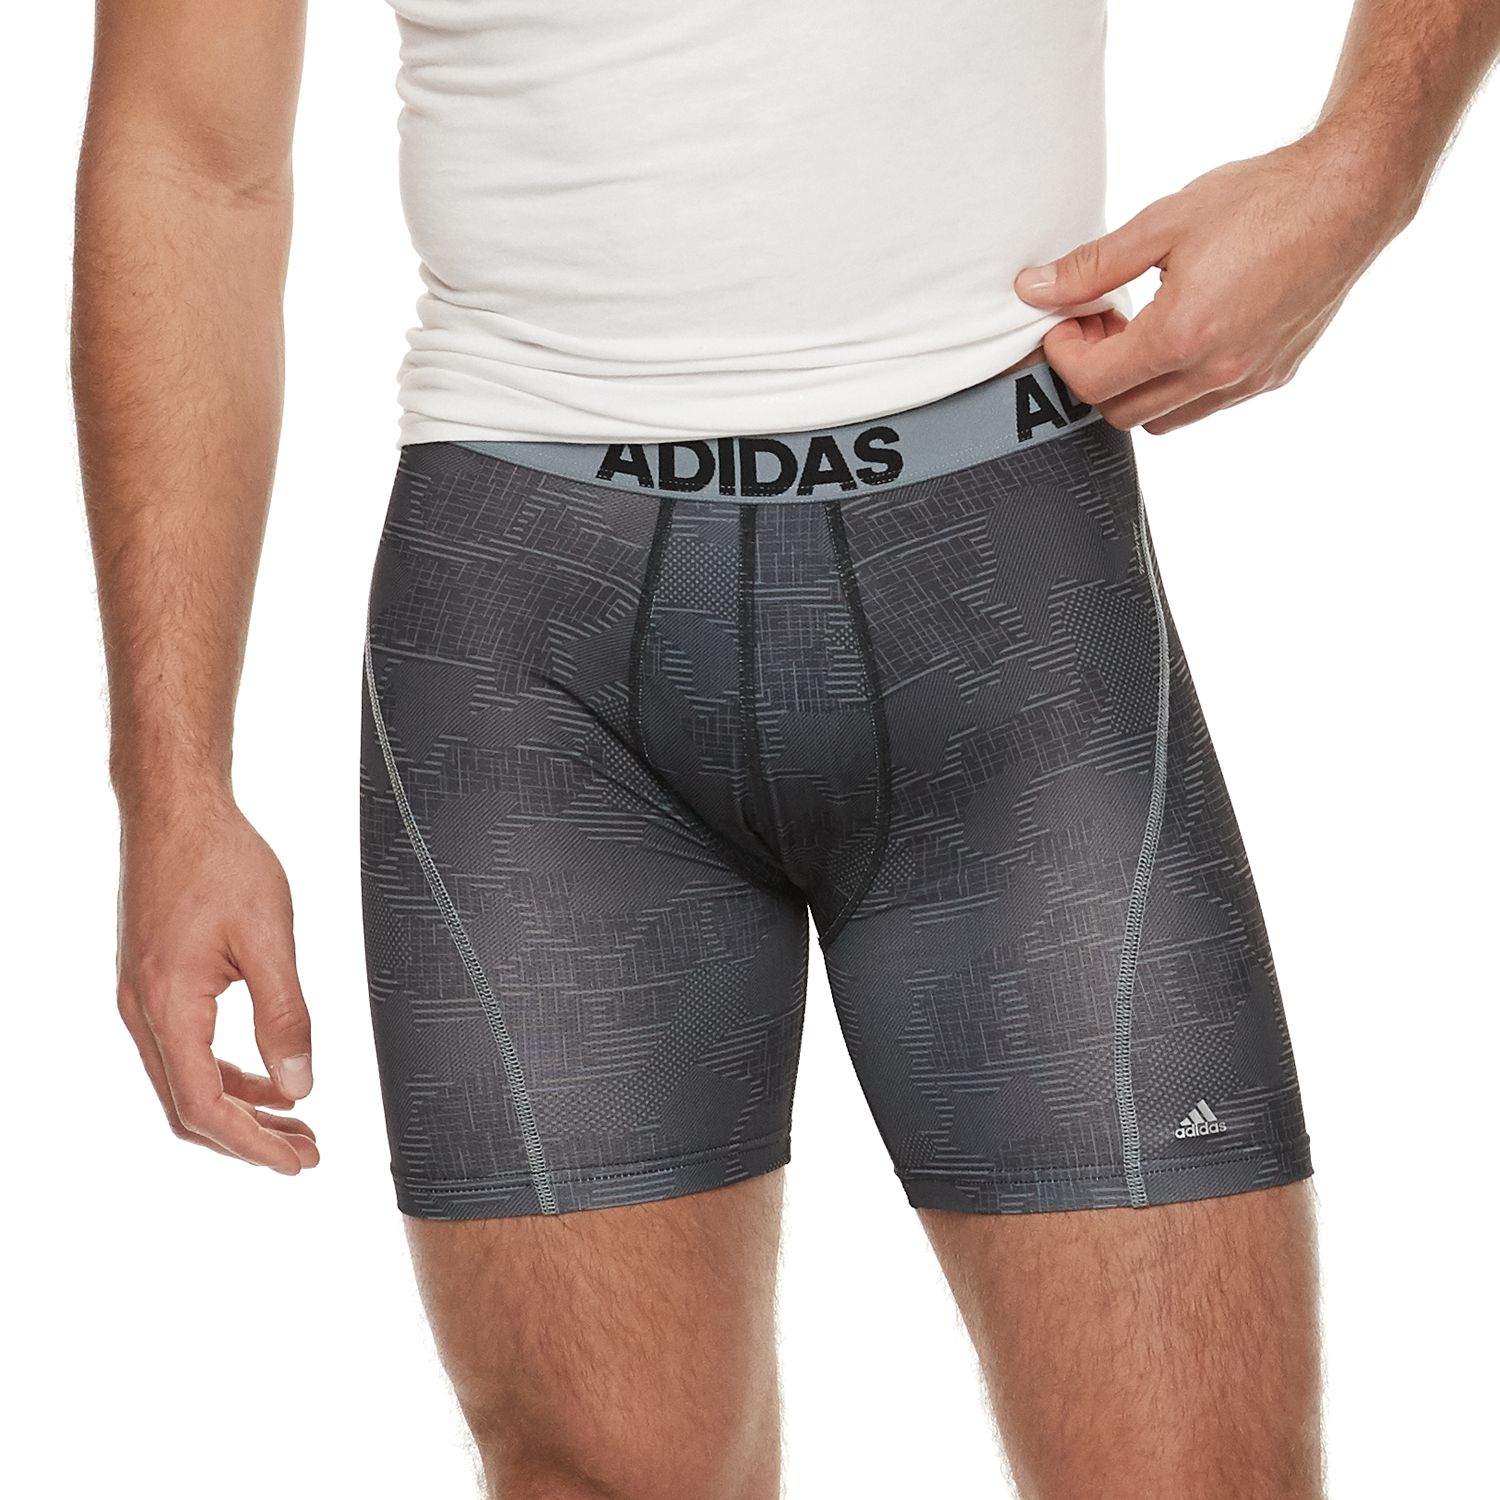 adidas climacool boxers